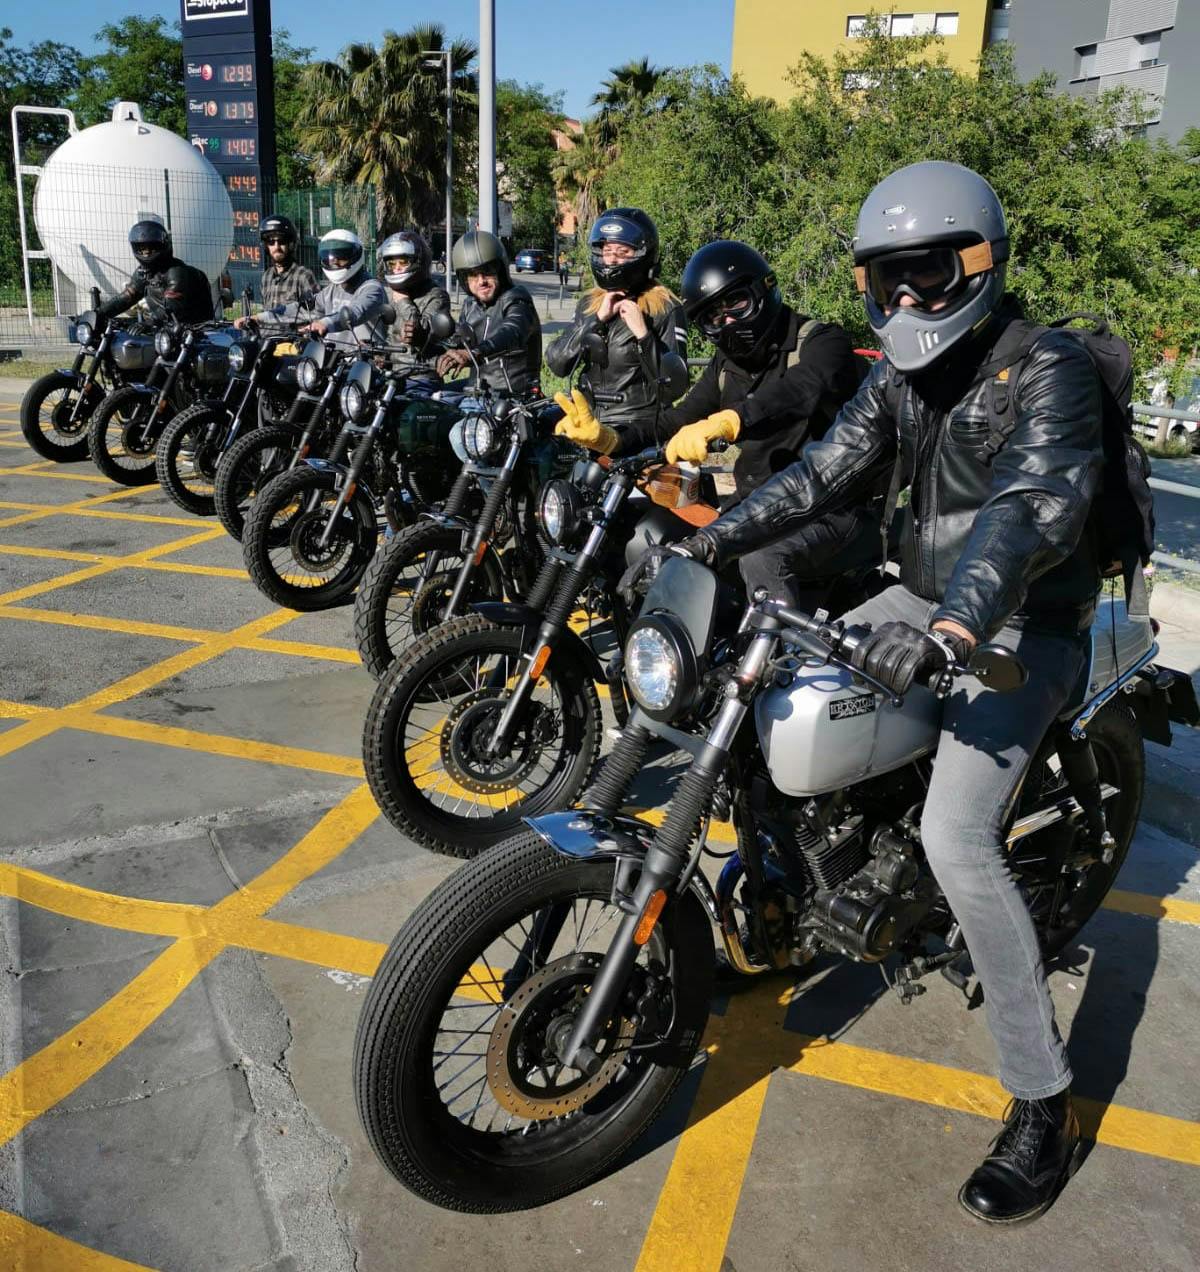 Brixton Motorcycles - Tour in Barcelona